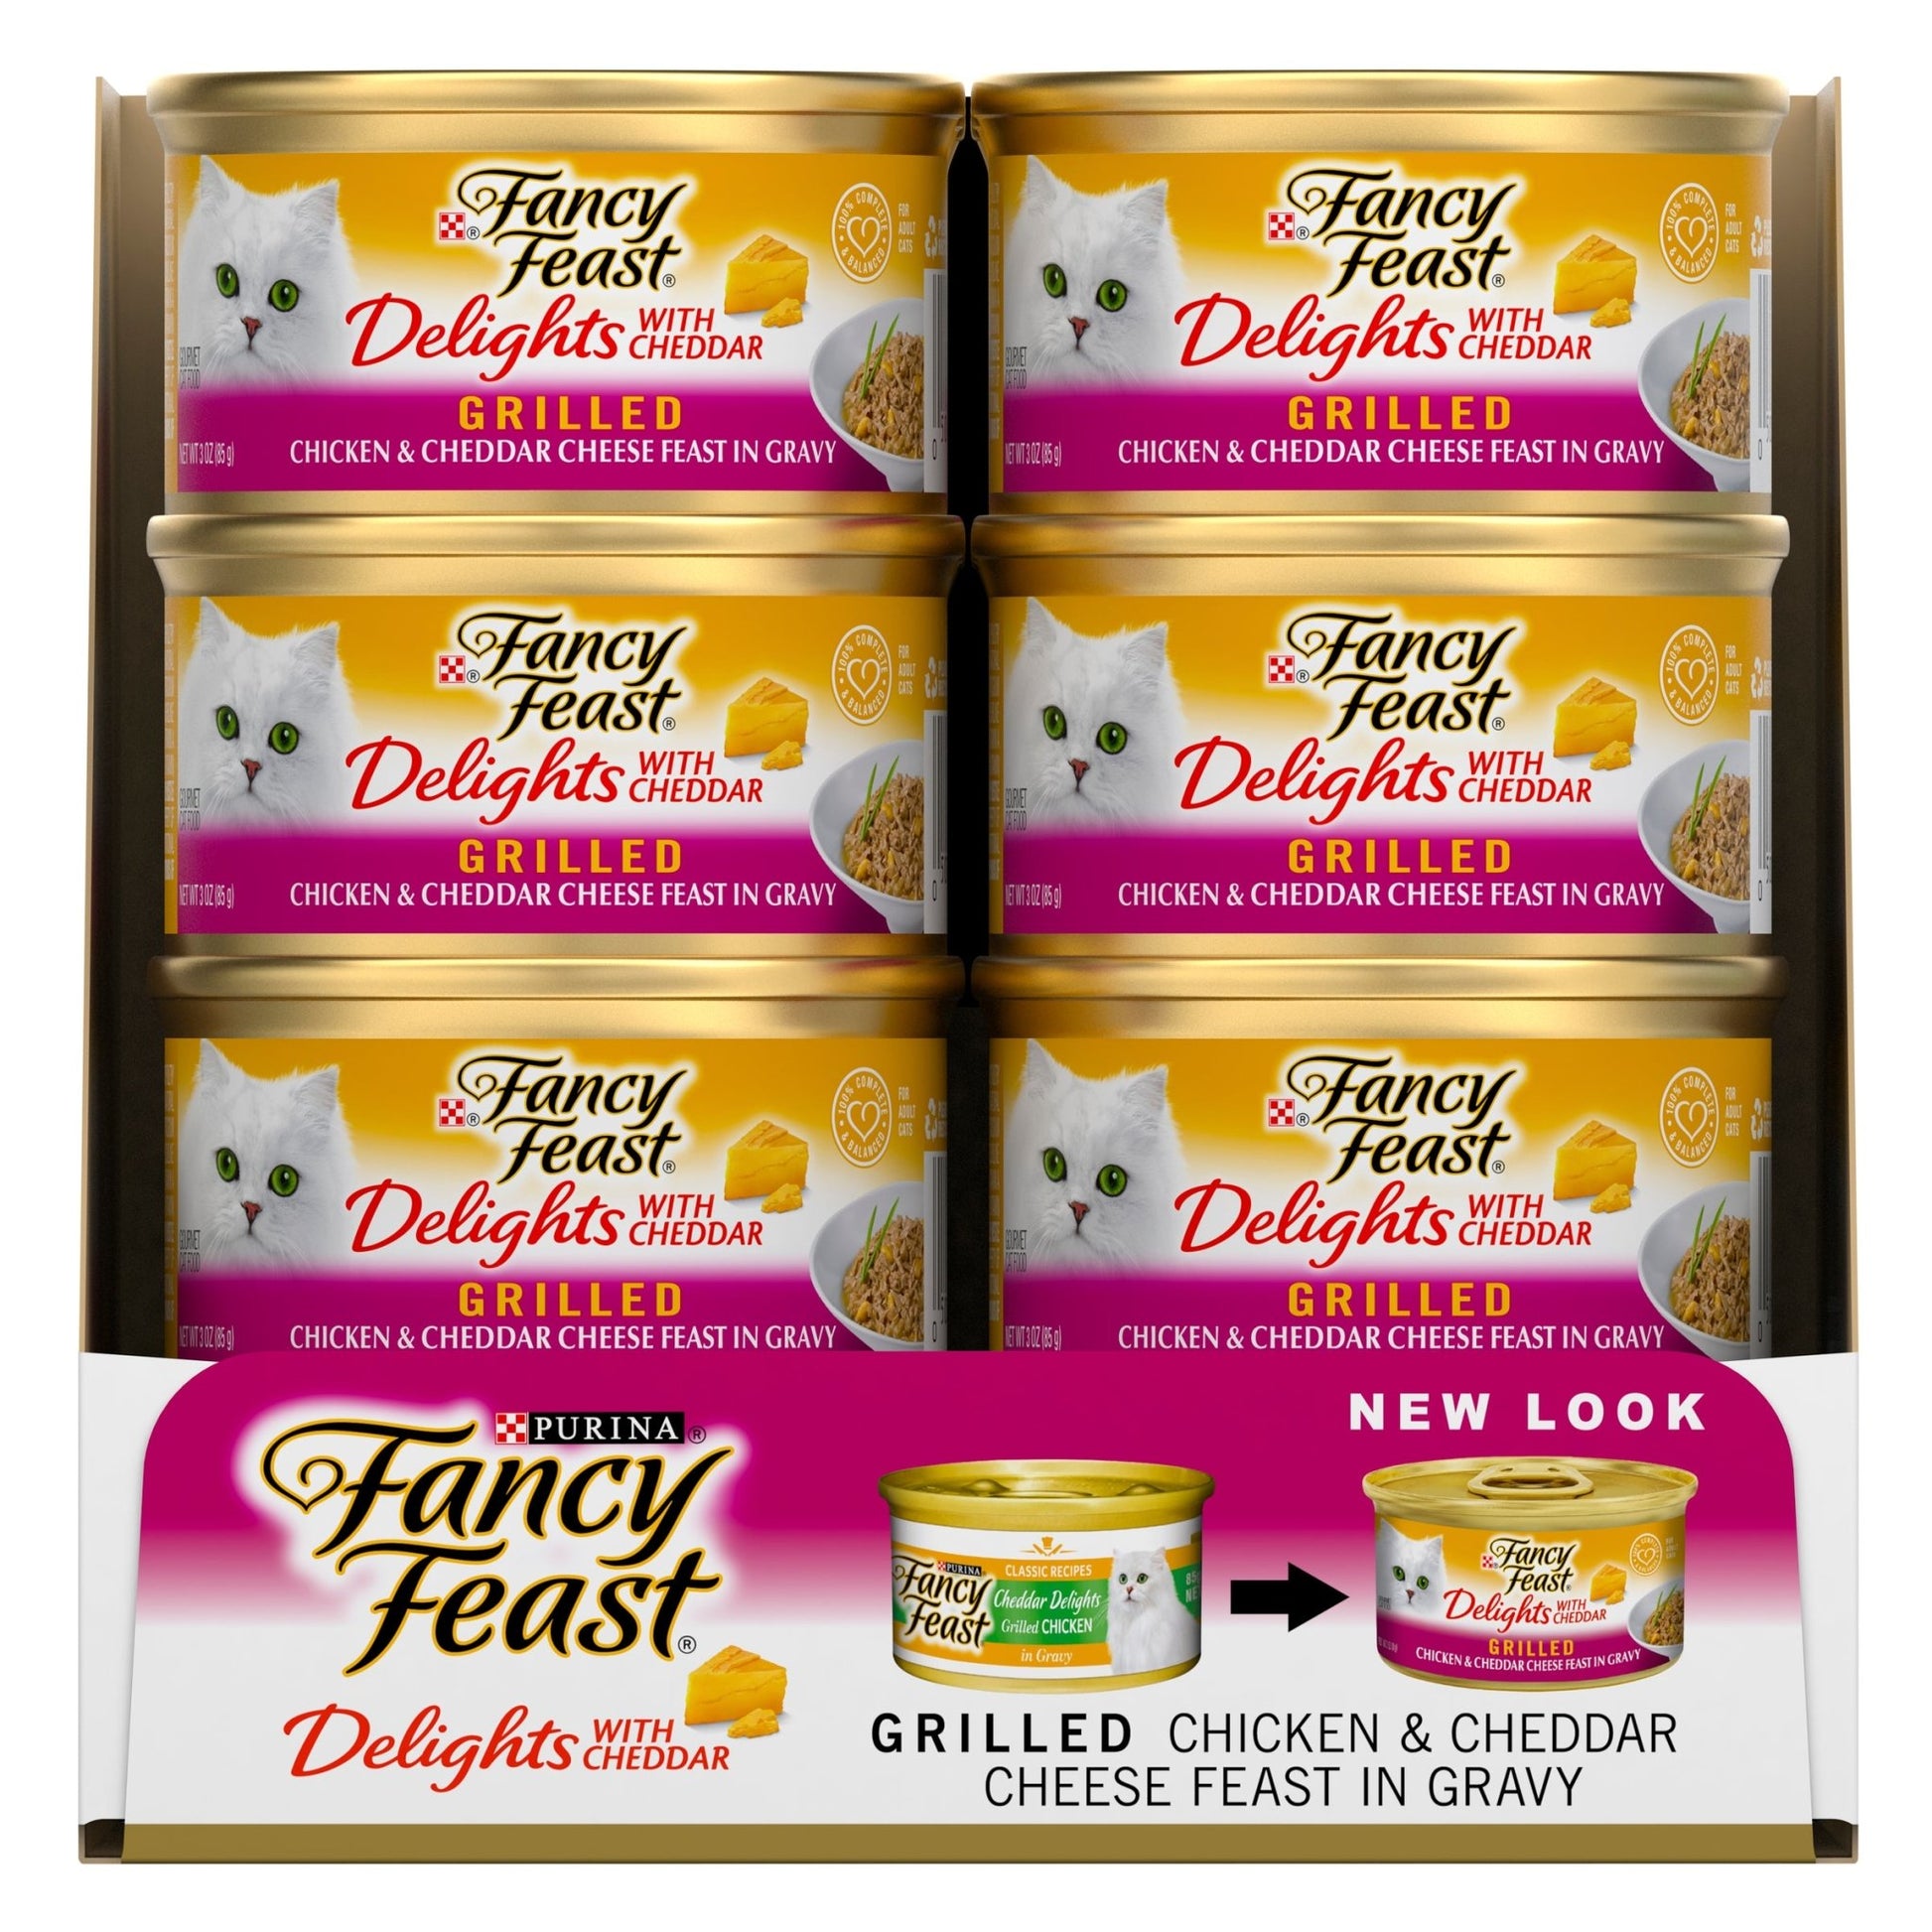 Fancy Feast Delights with Cheddar Grilled Chicken 24x85g - Woonona Petfood & Produce